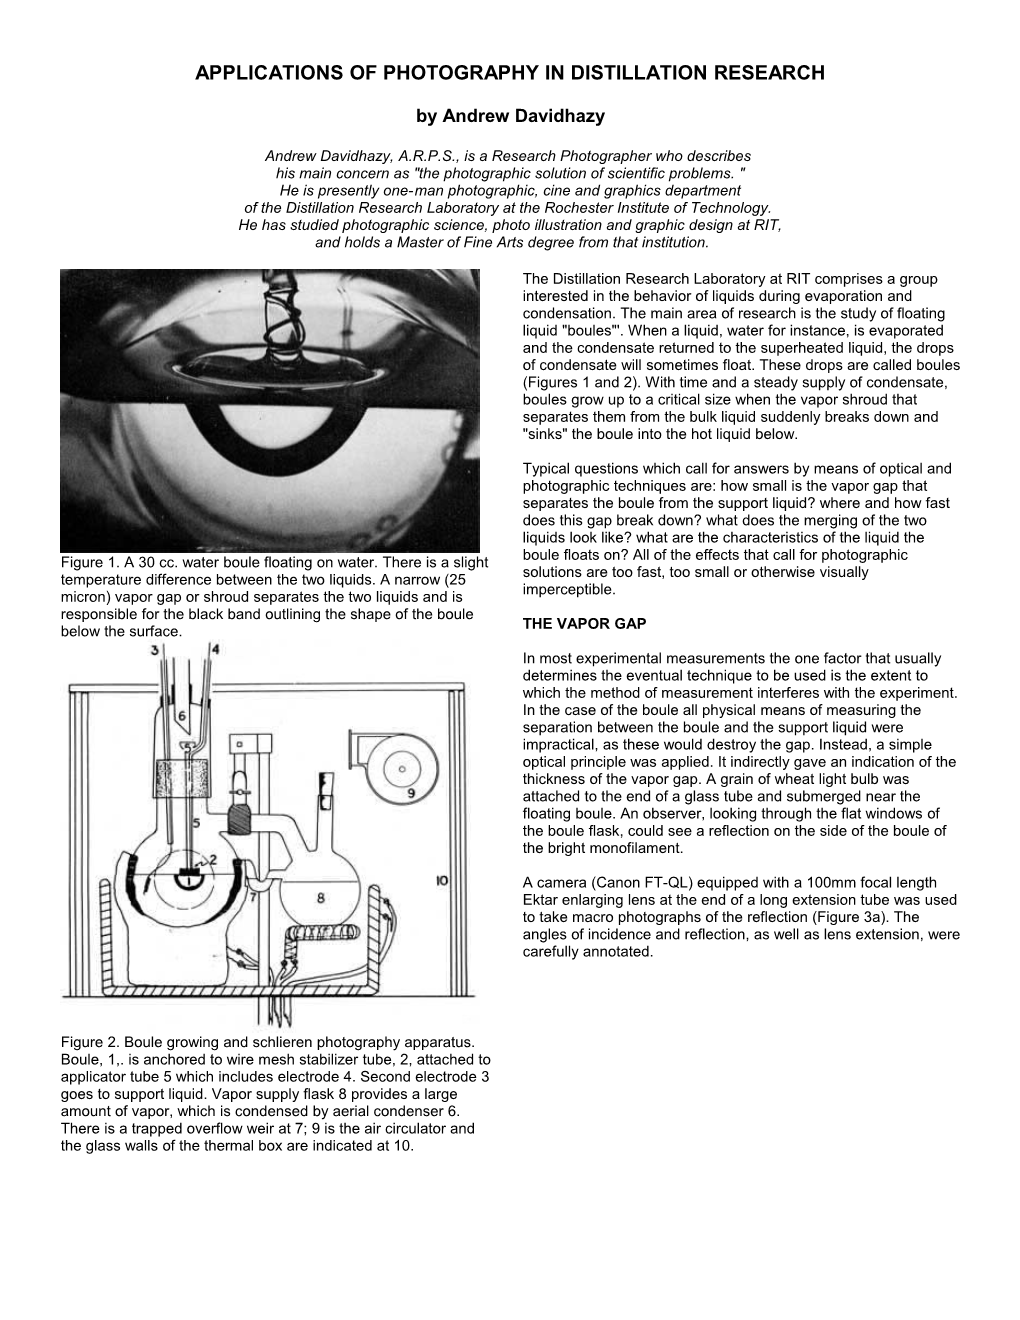 Applications of Photography in Distillation Research